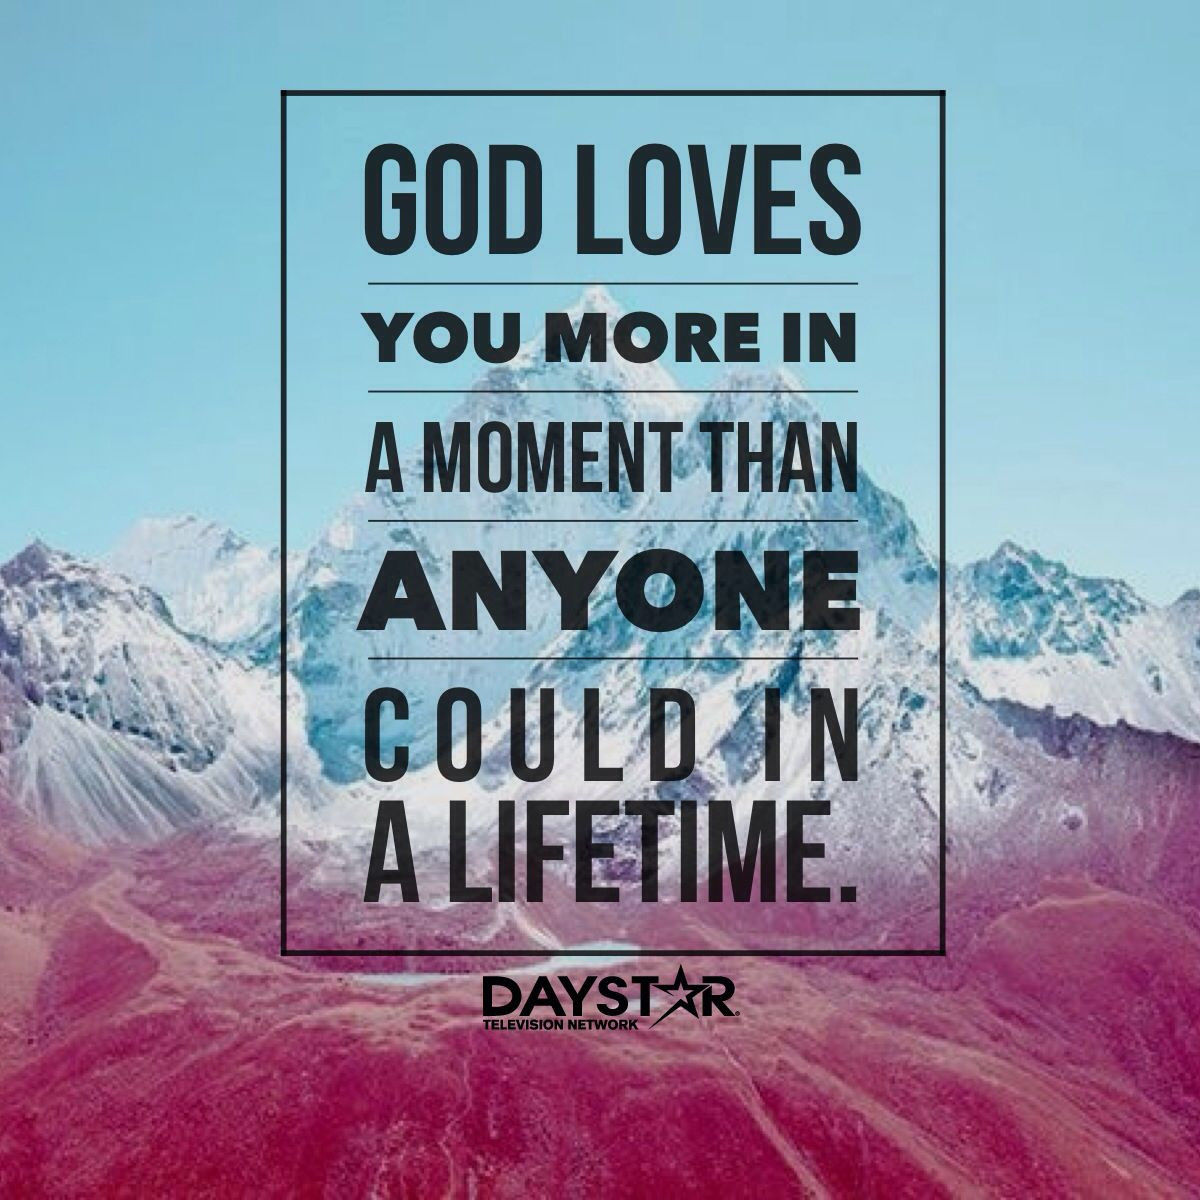 God Loves You Quotes
 God loves you more in a moment than anyone could in a